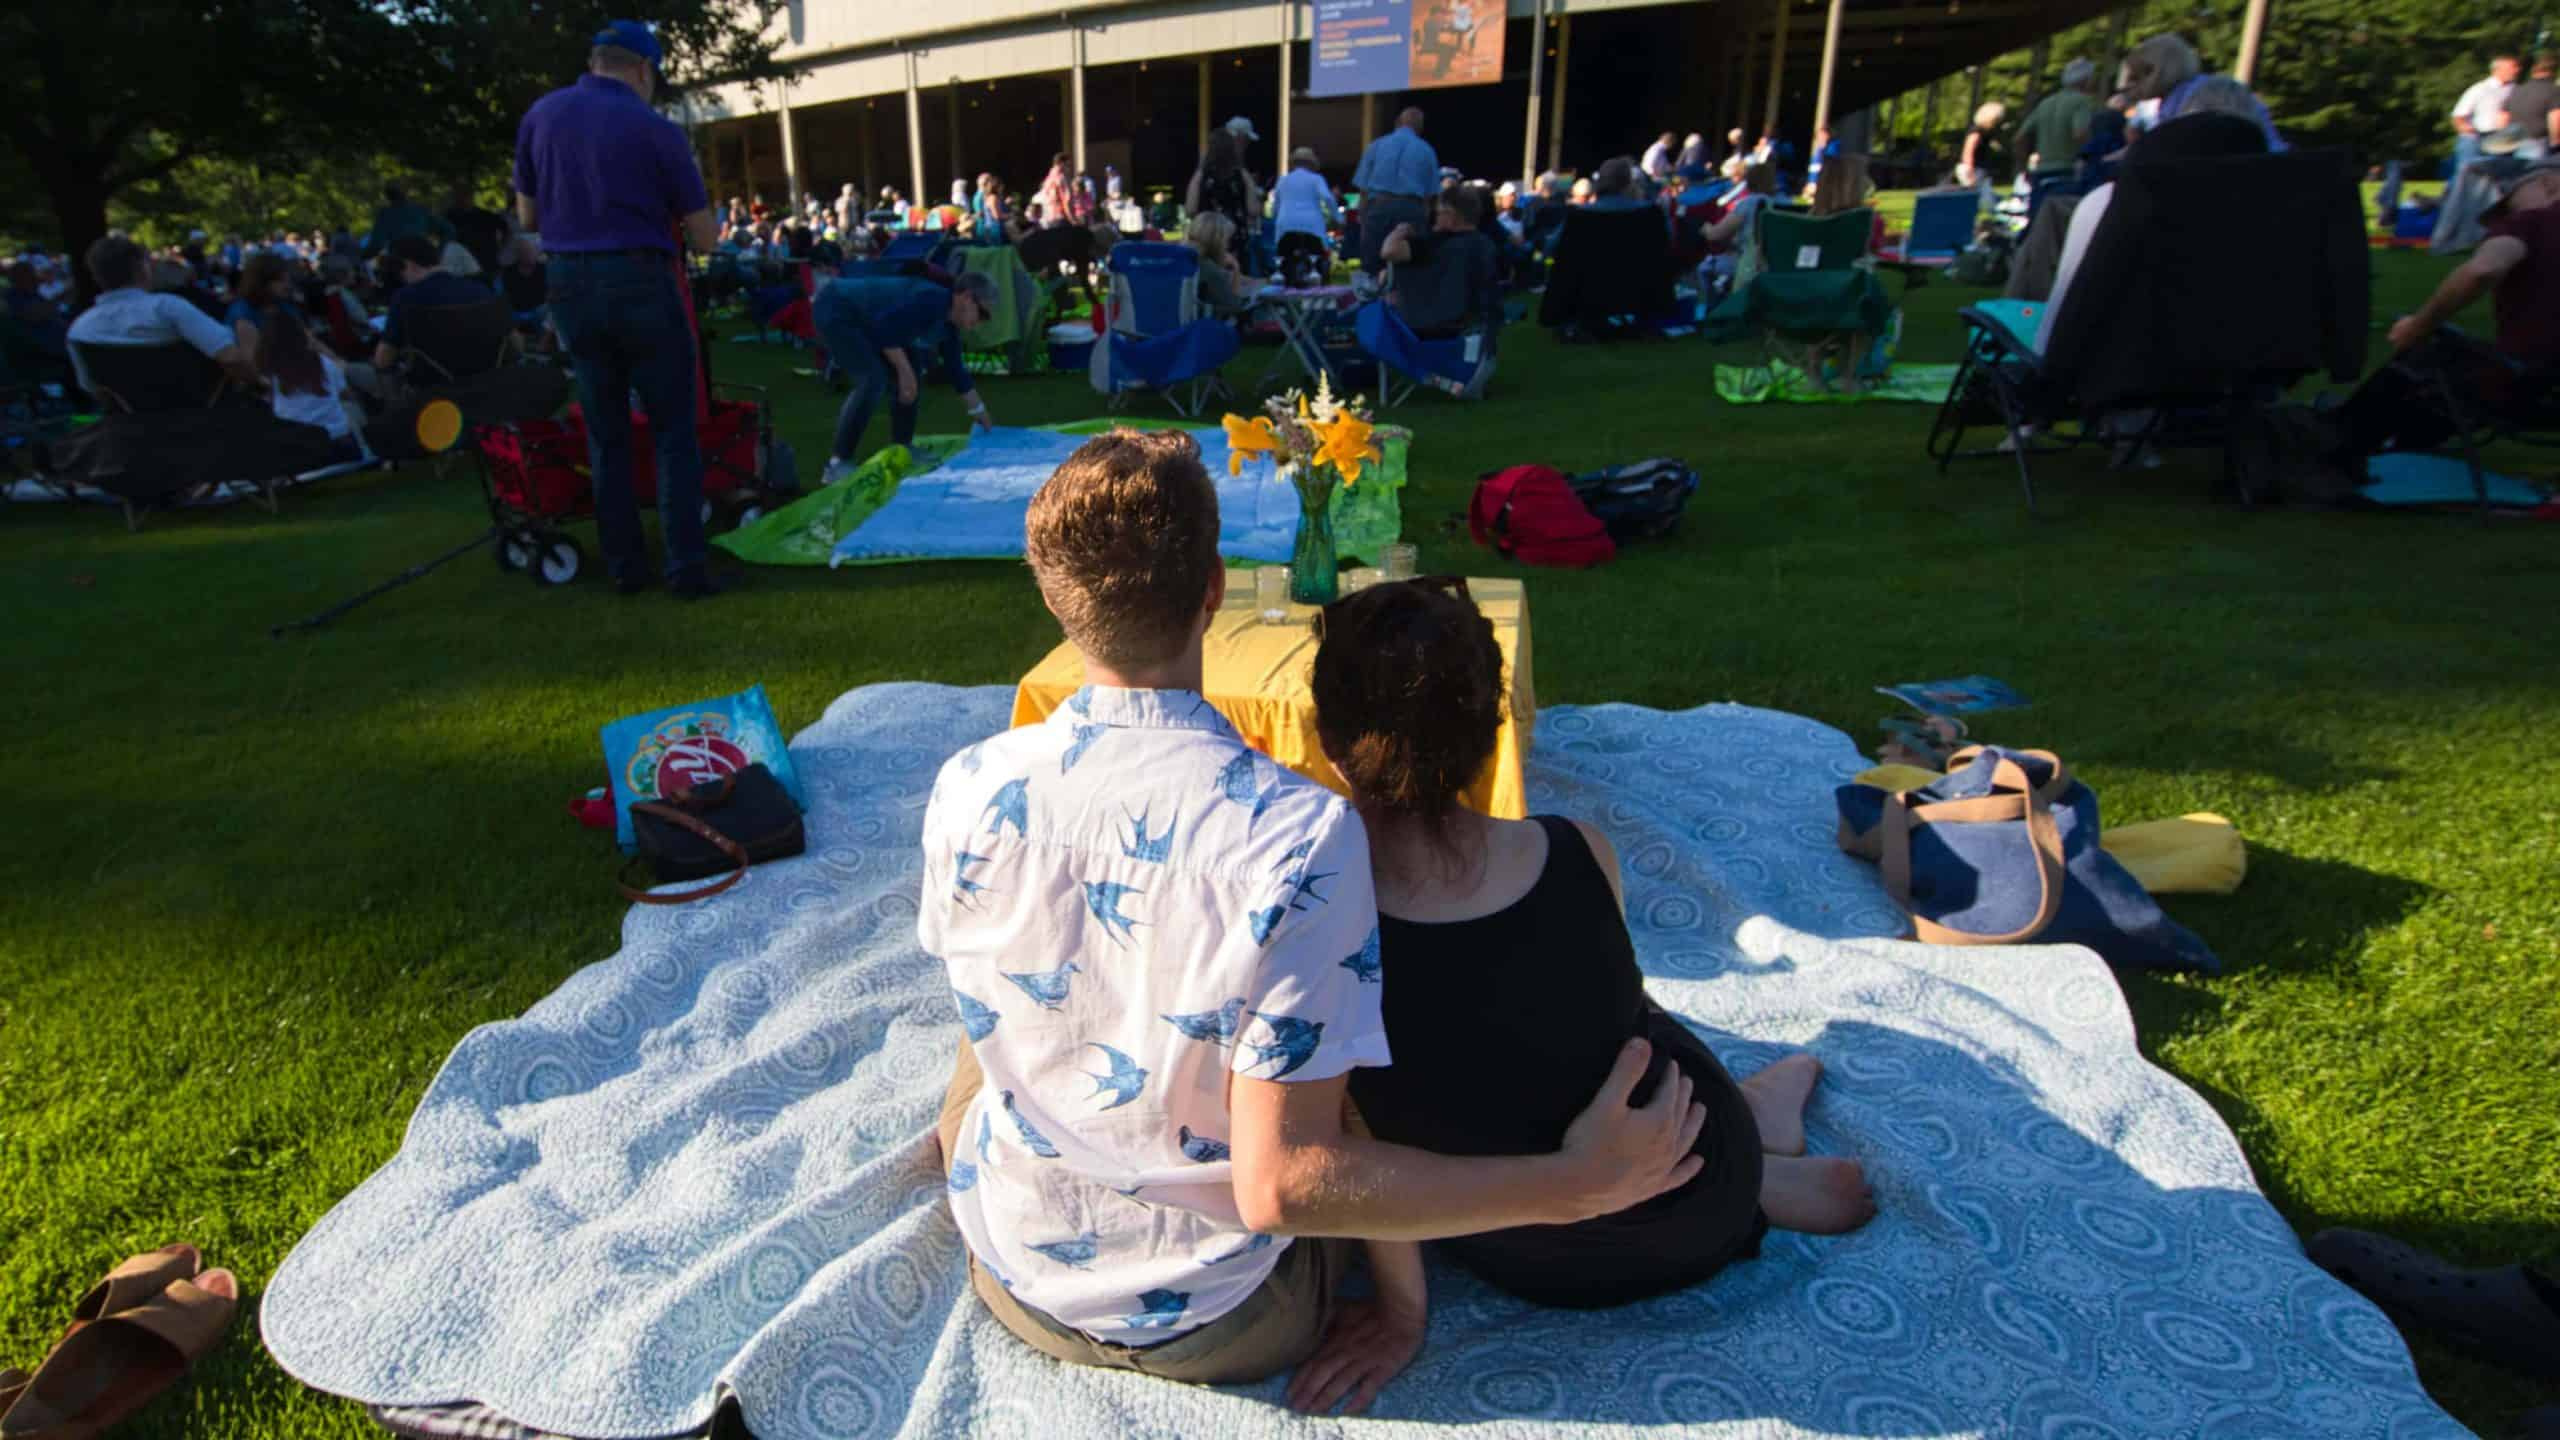 Tanglewood on Parade Tuesday, August 2 2022 Western MA Arts Events